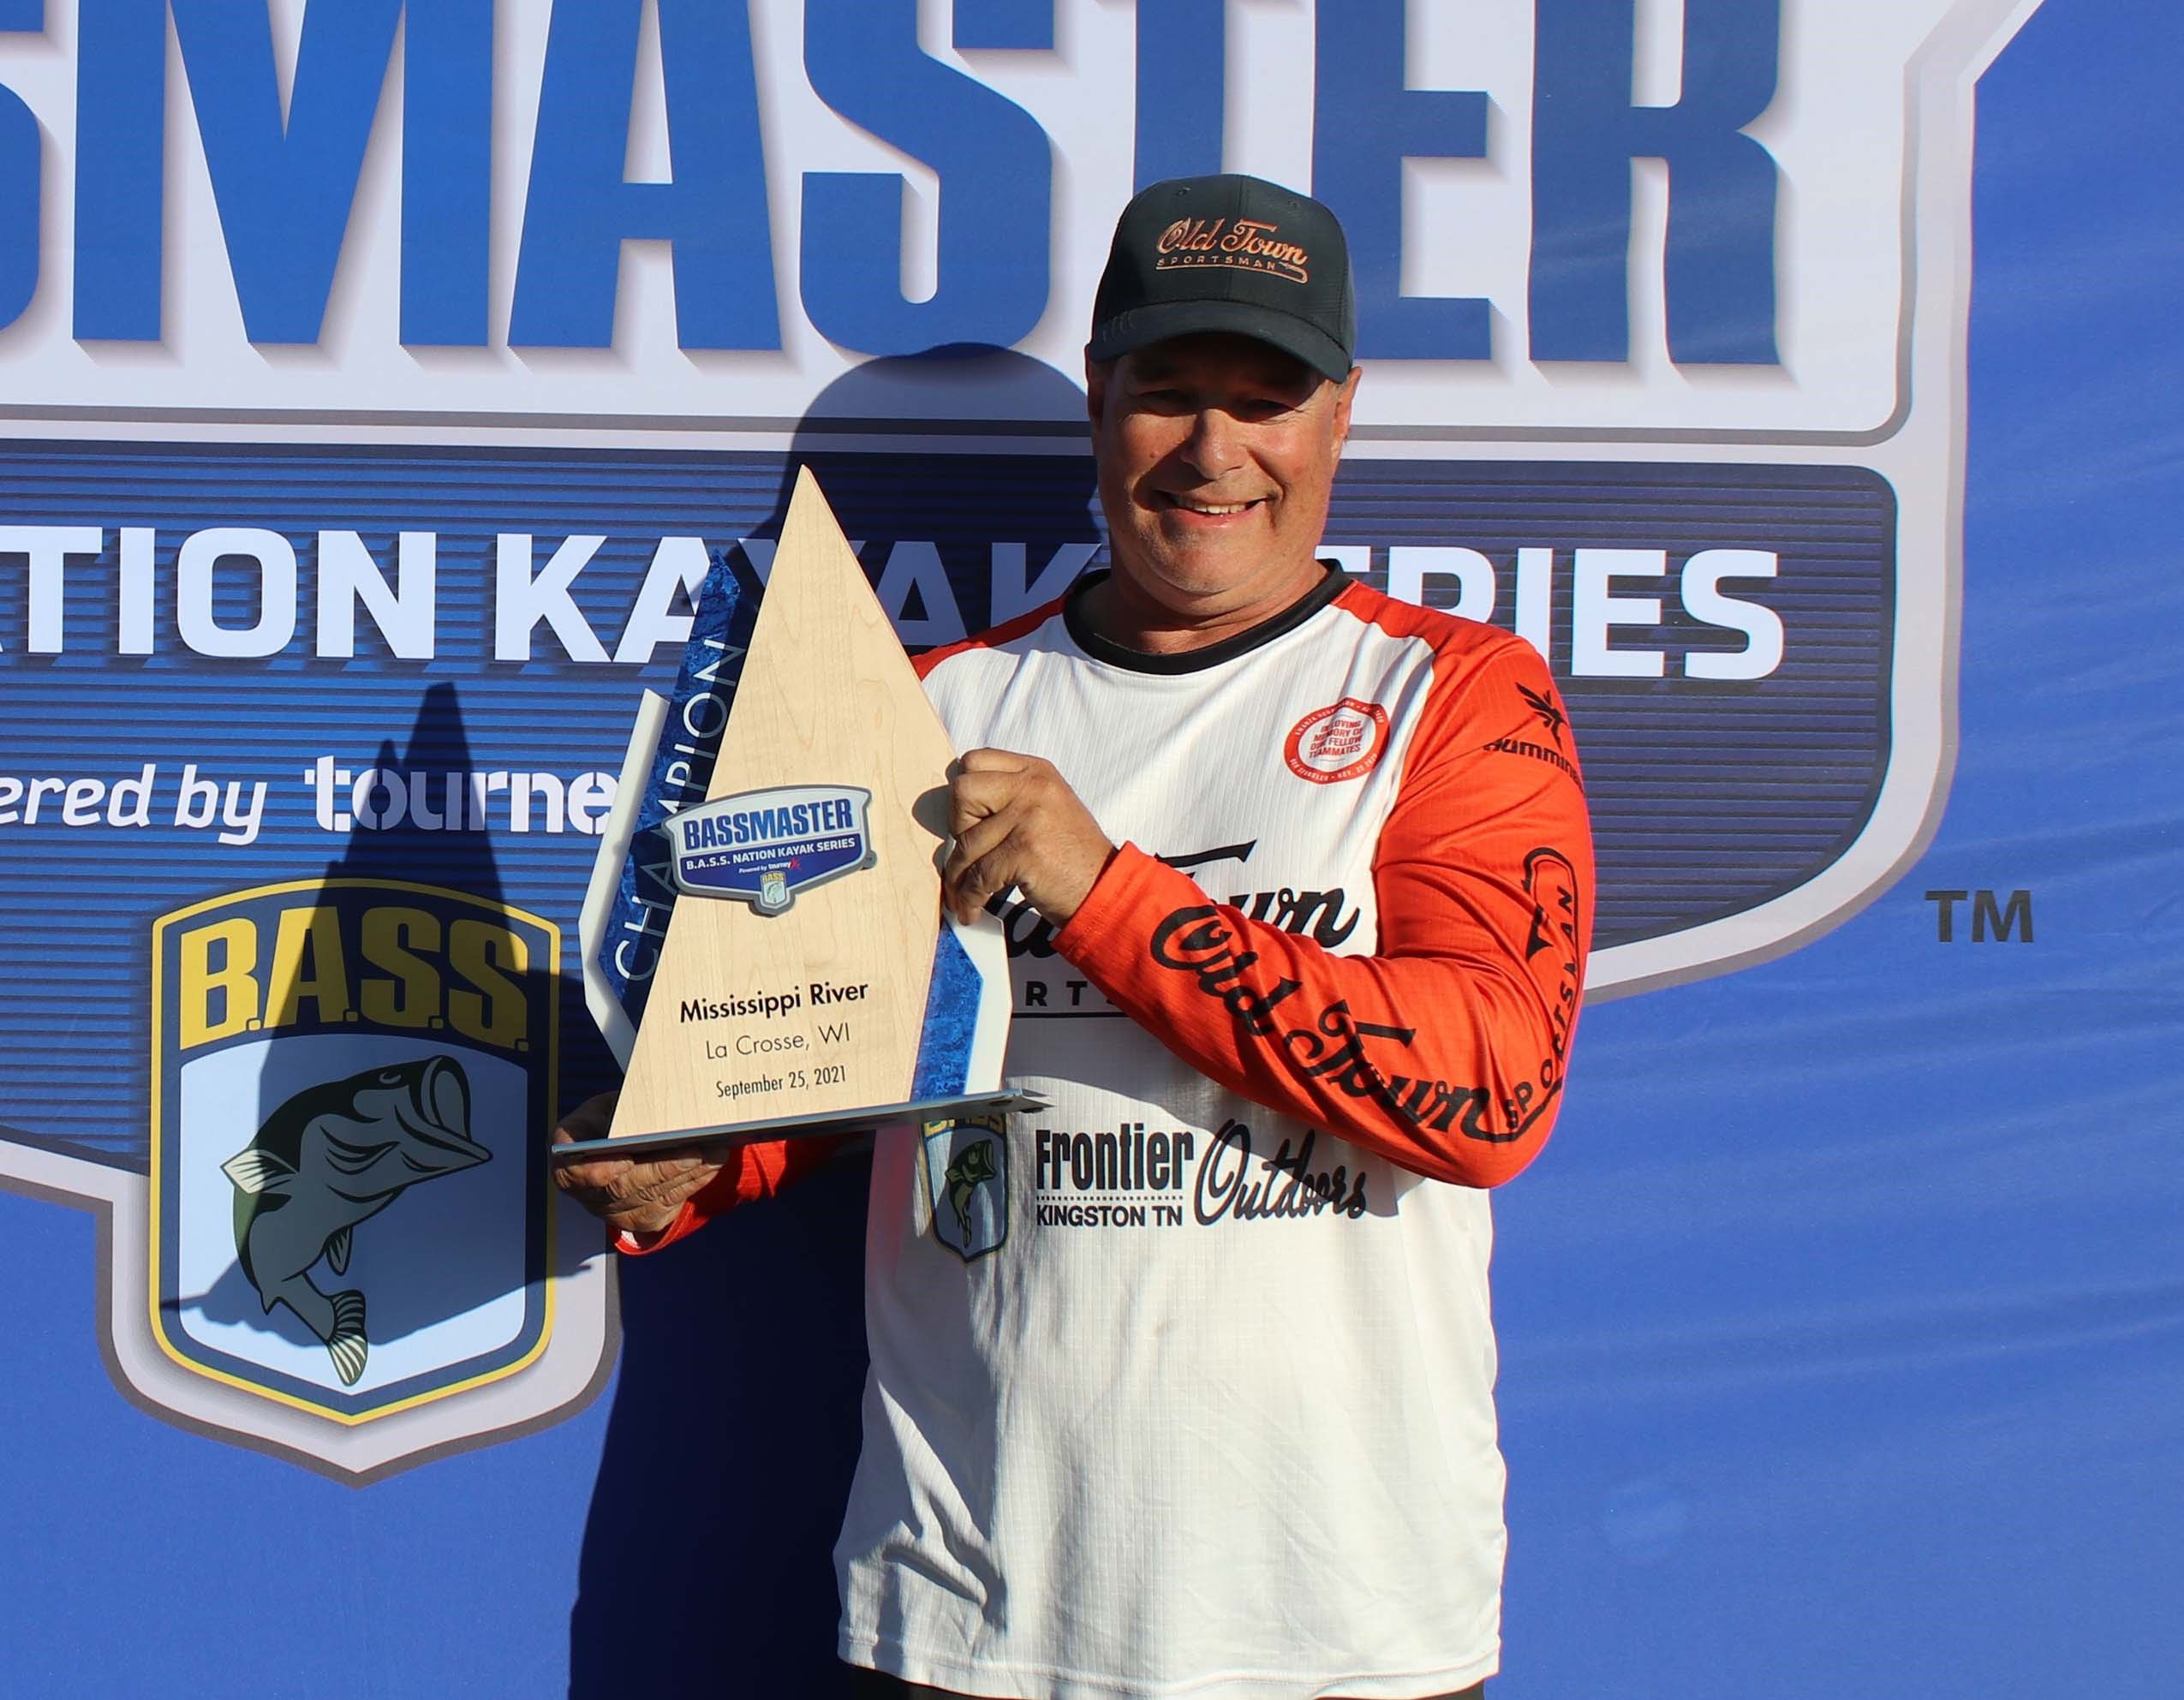 Jim Davis Takes B.A.S.S. Nation Kayak Series Victory On The Mississippi River